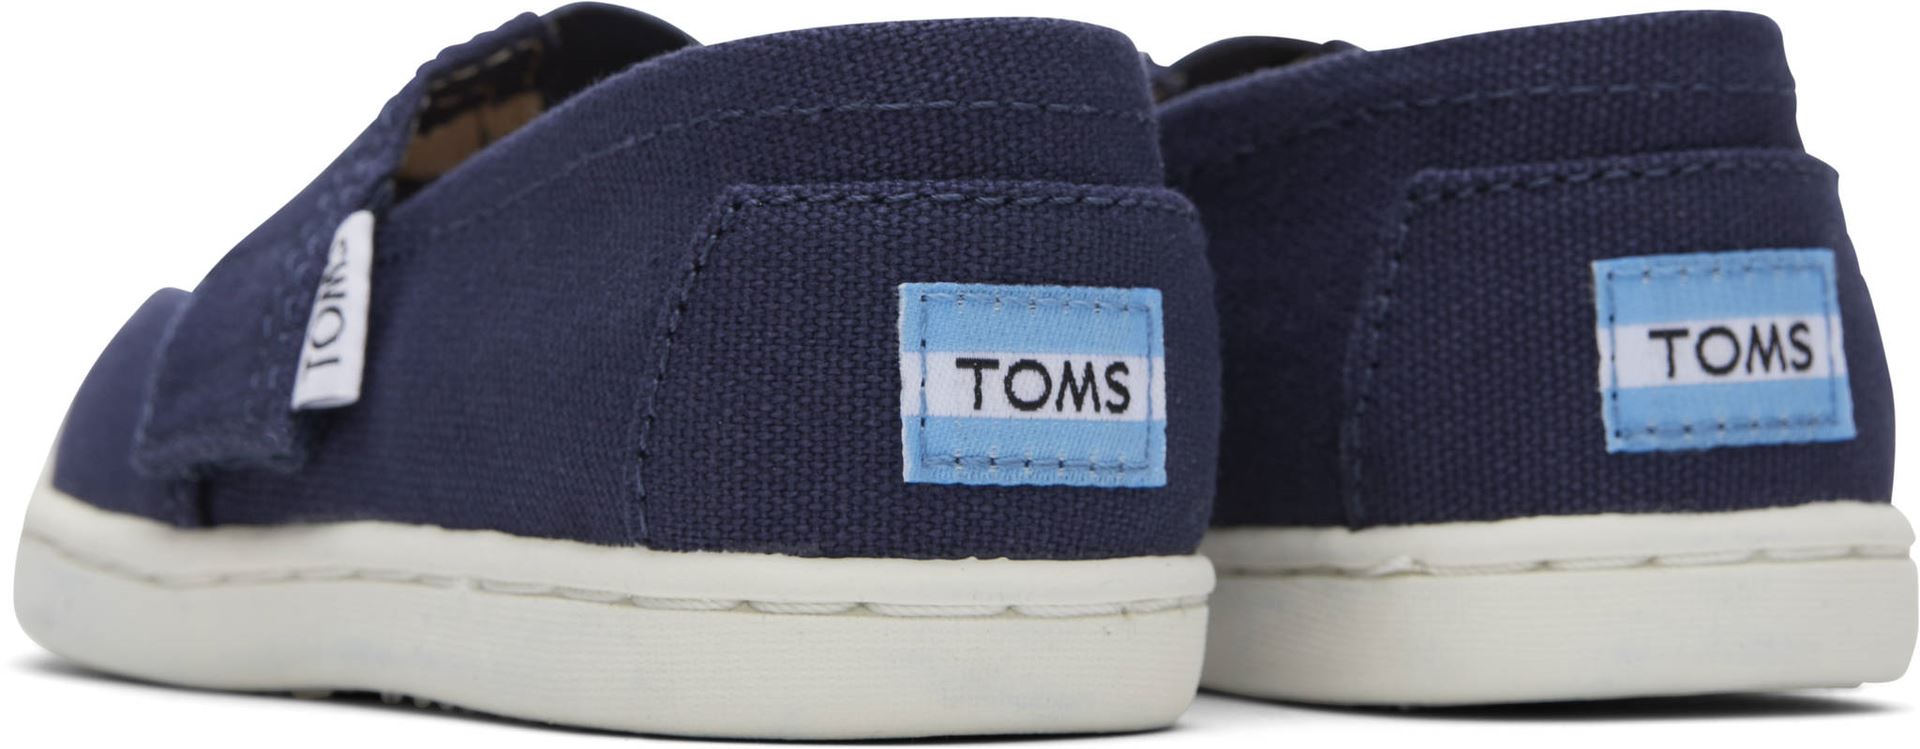 A unisex canvas shoe by TOMS, style Alpargata, in navy with a velcro strap. Back view of a pair.